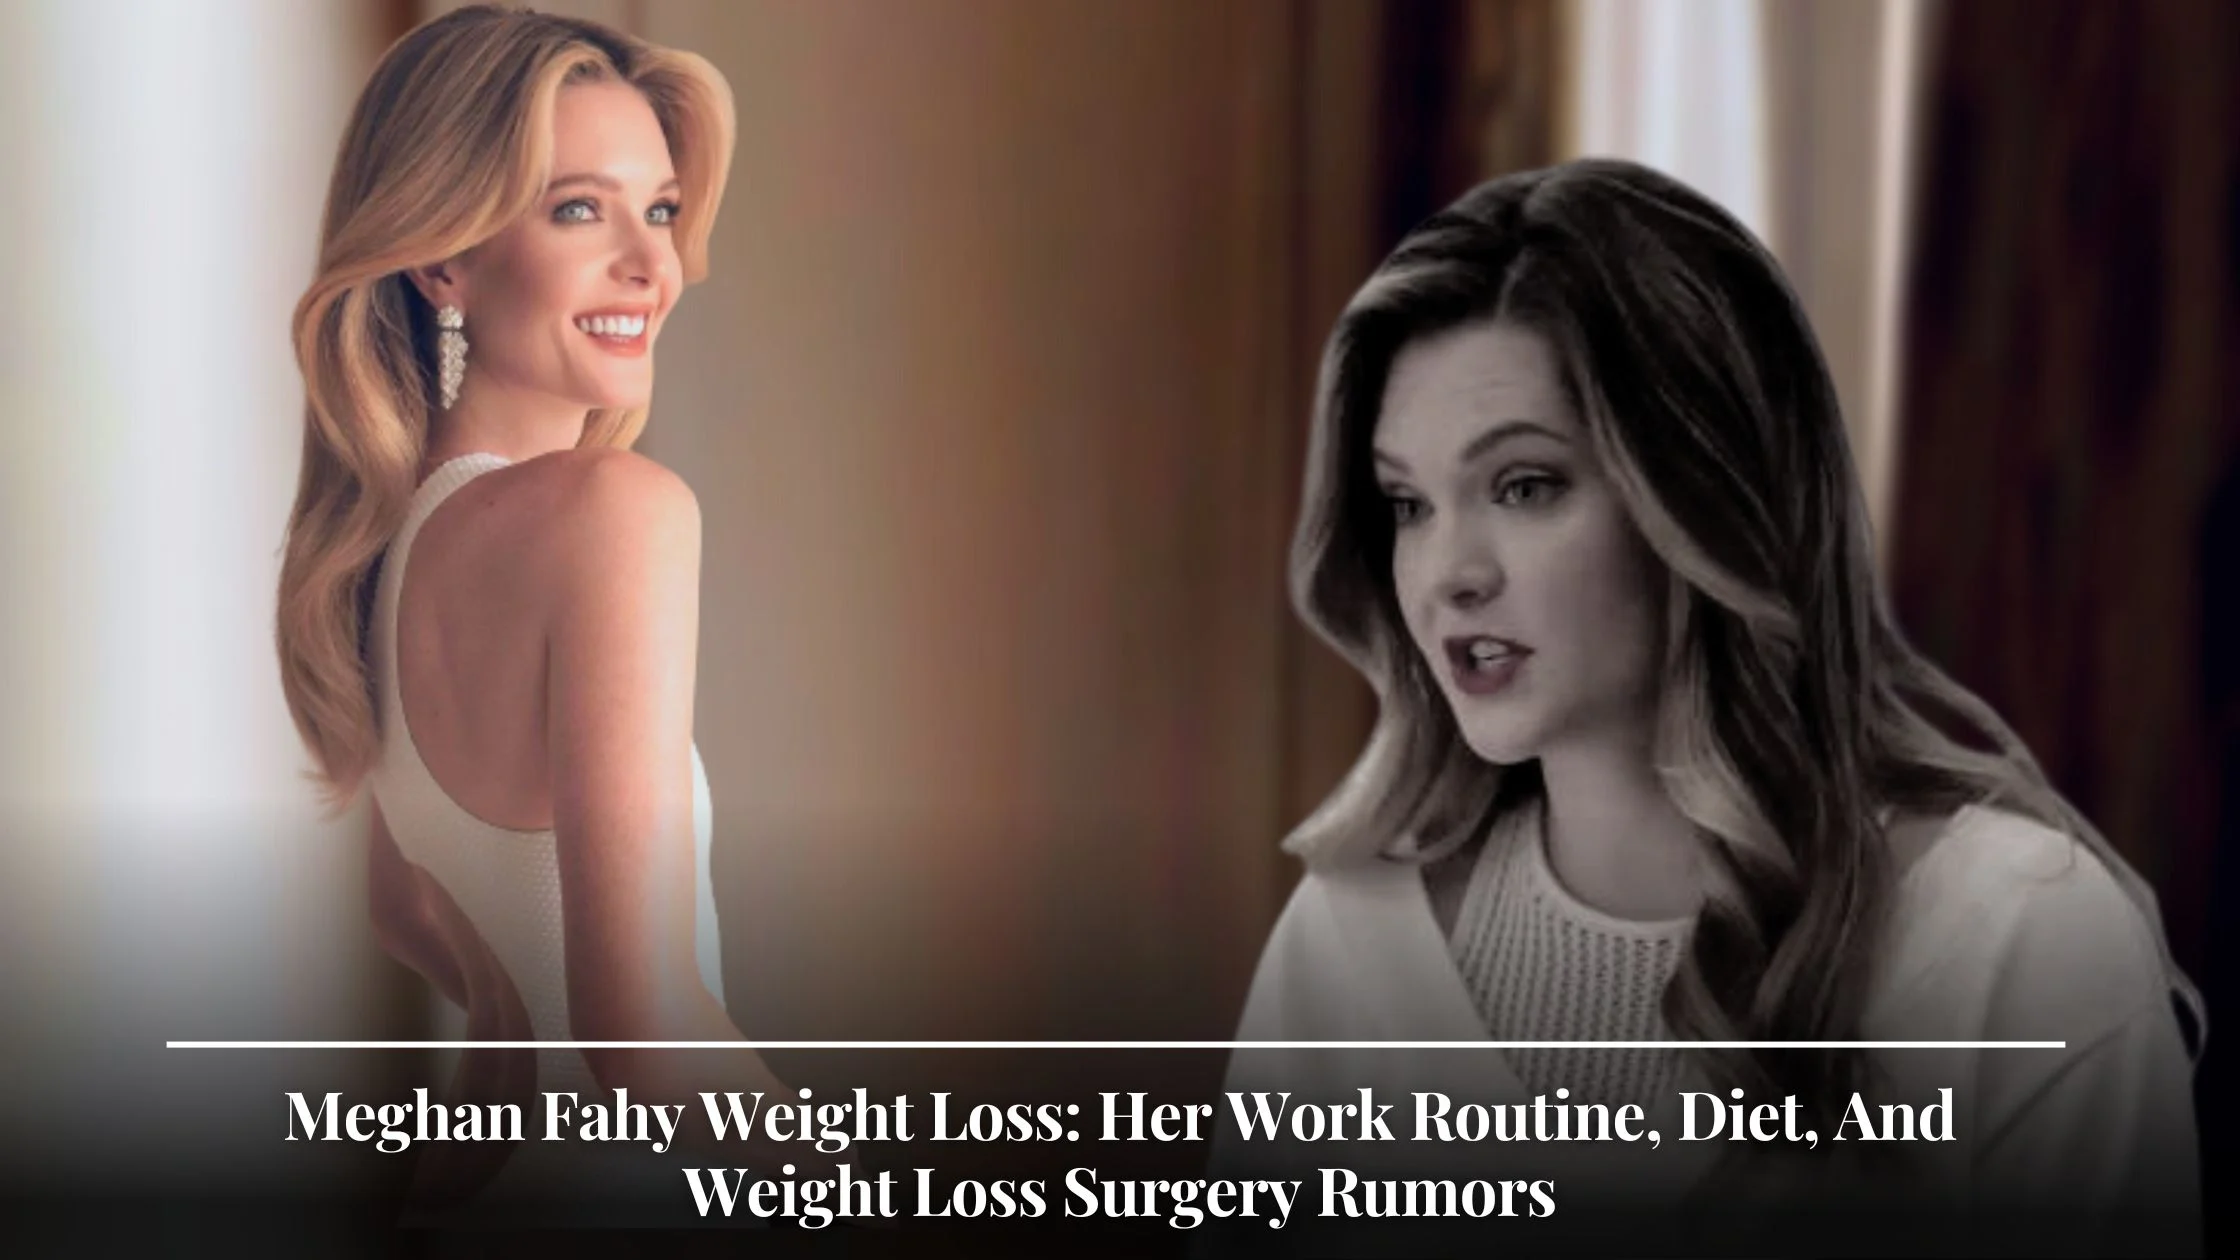 Meghan Fahy Weight Loss Her Work Routine, Diet, And Weight Loss Surgery Rumors